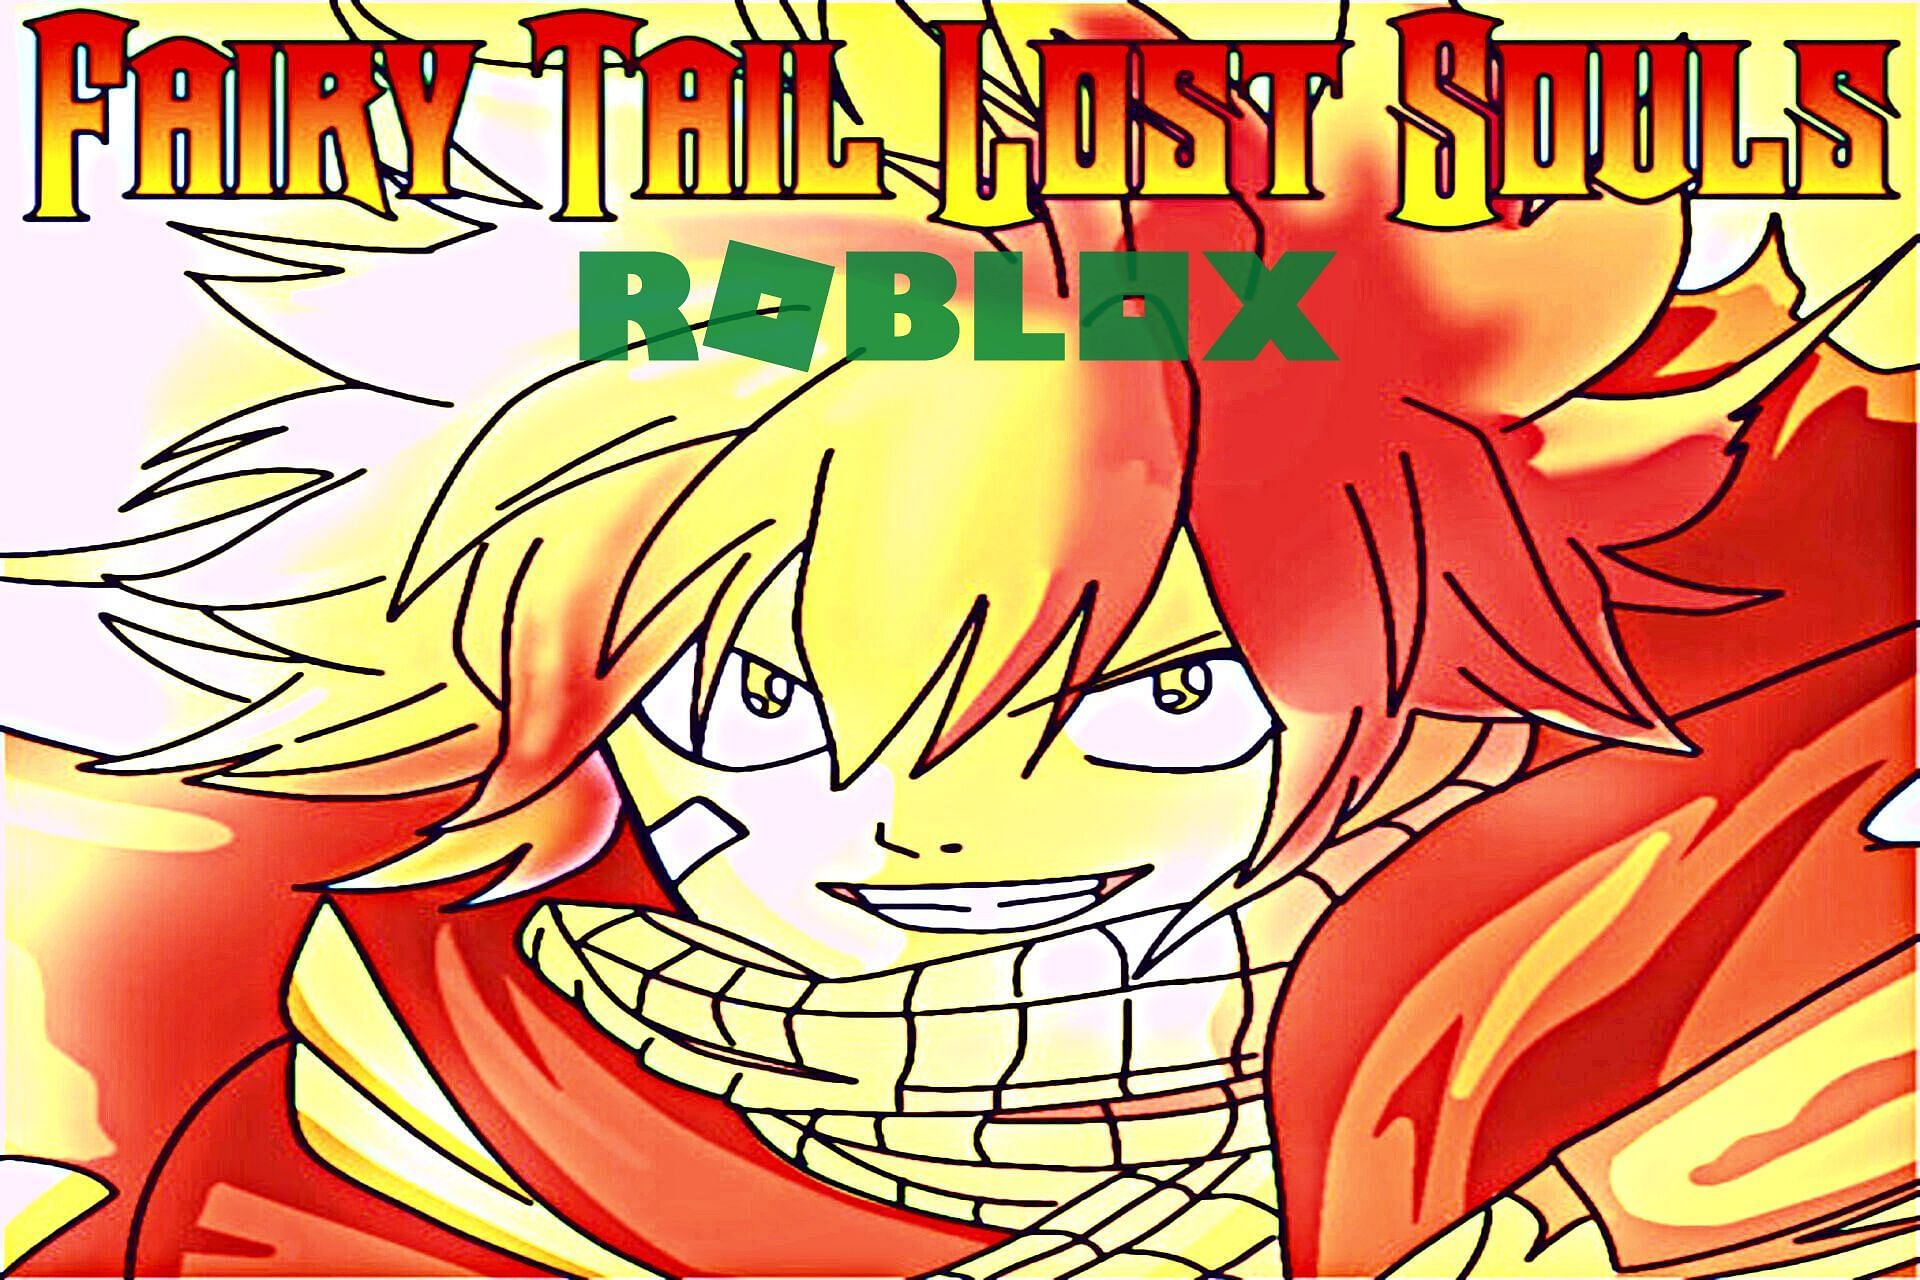 Get more rewards with free spins in Fairy Tail: Lost Souls (Image via Roblox)